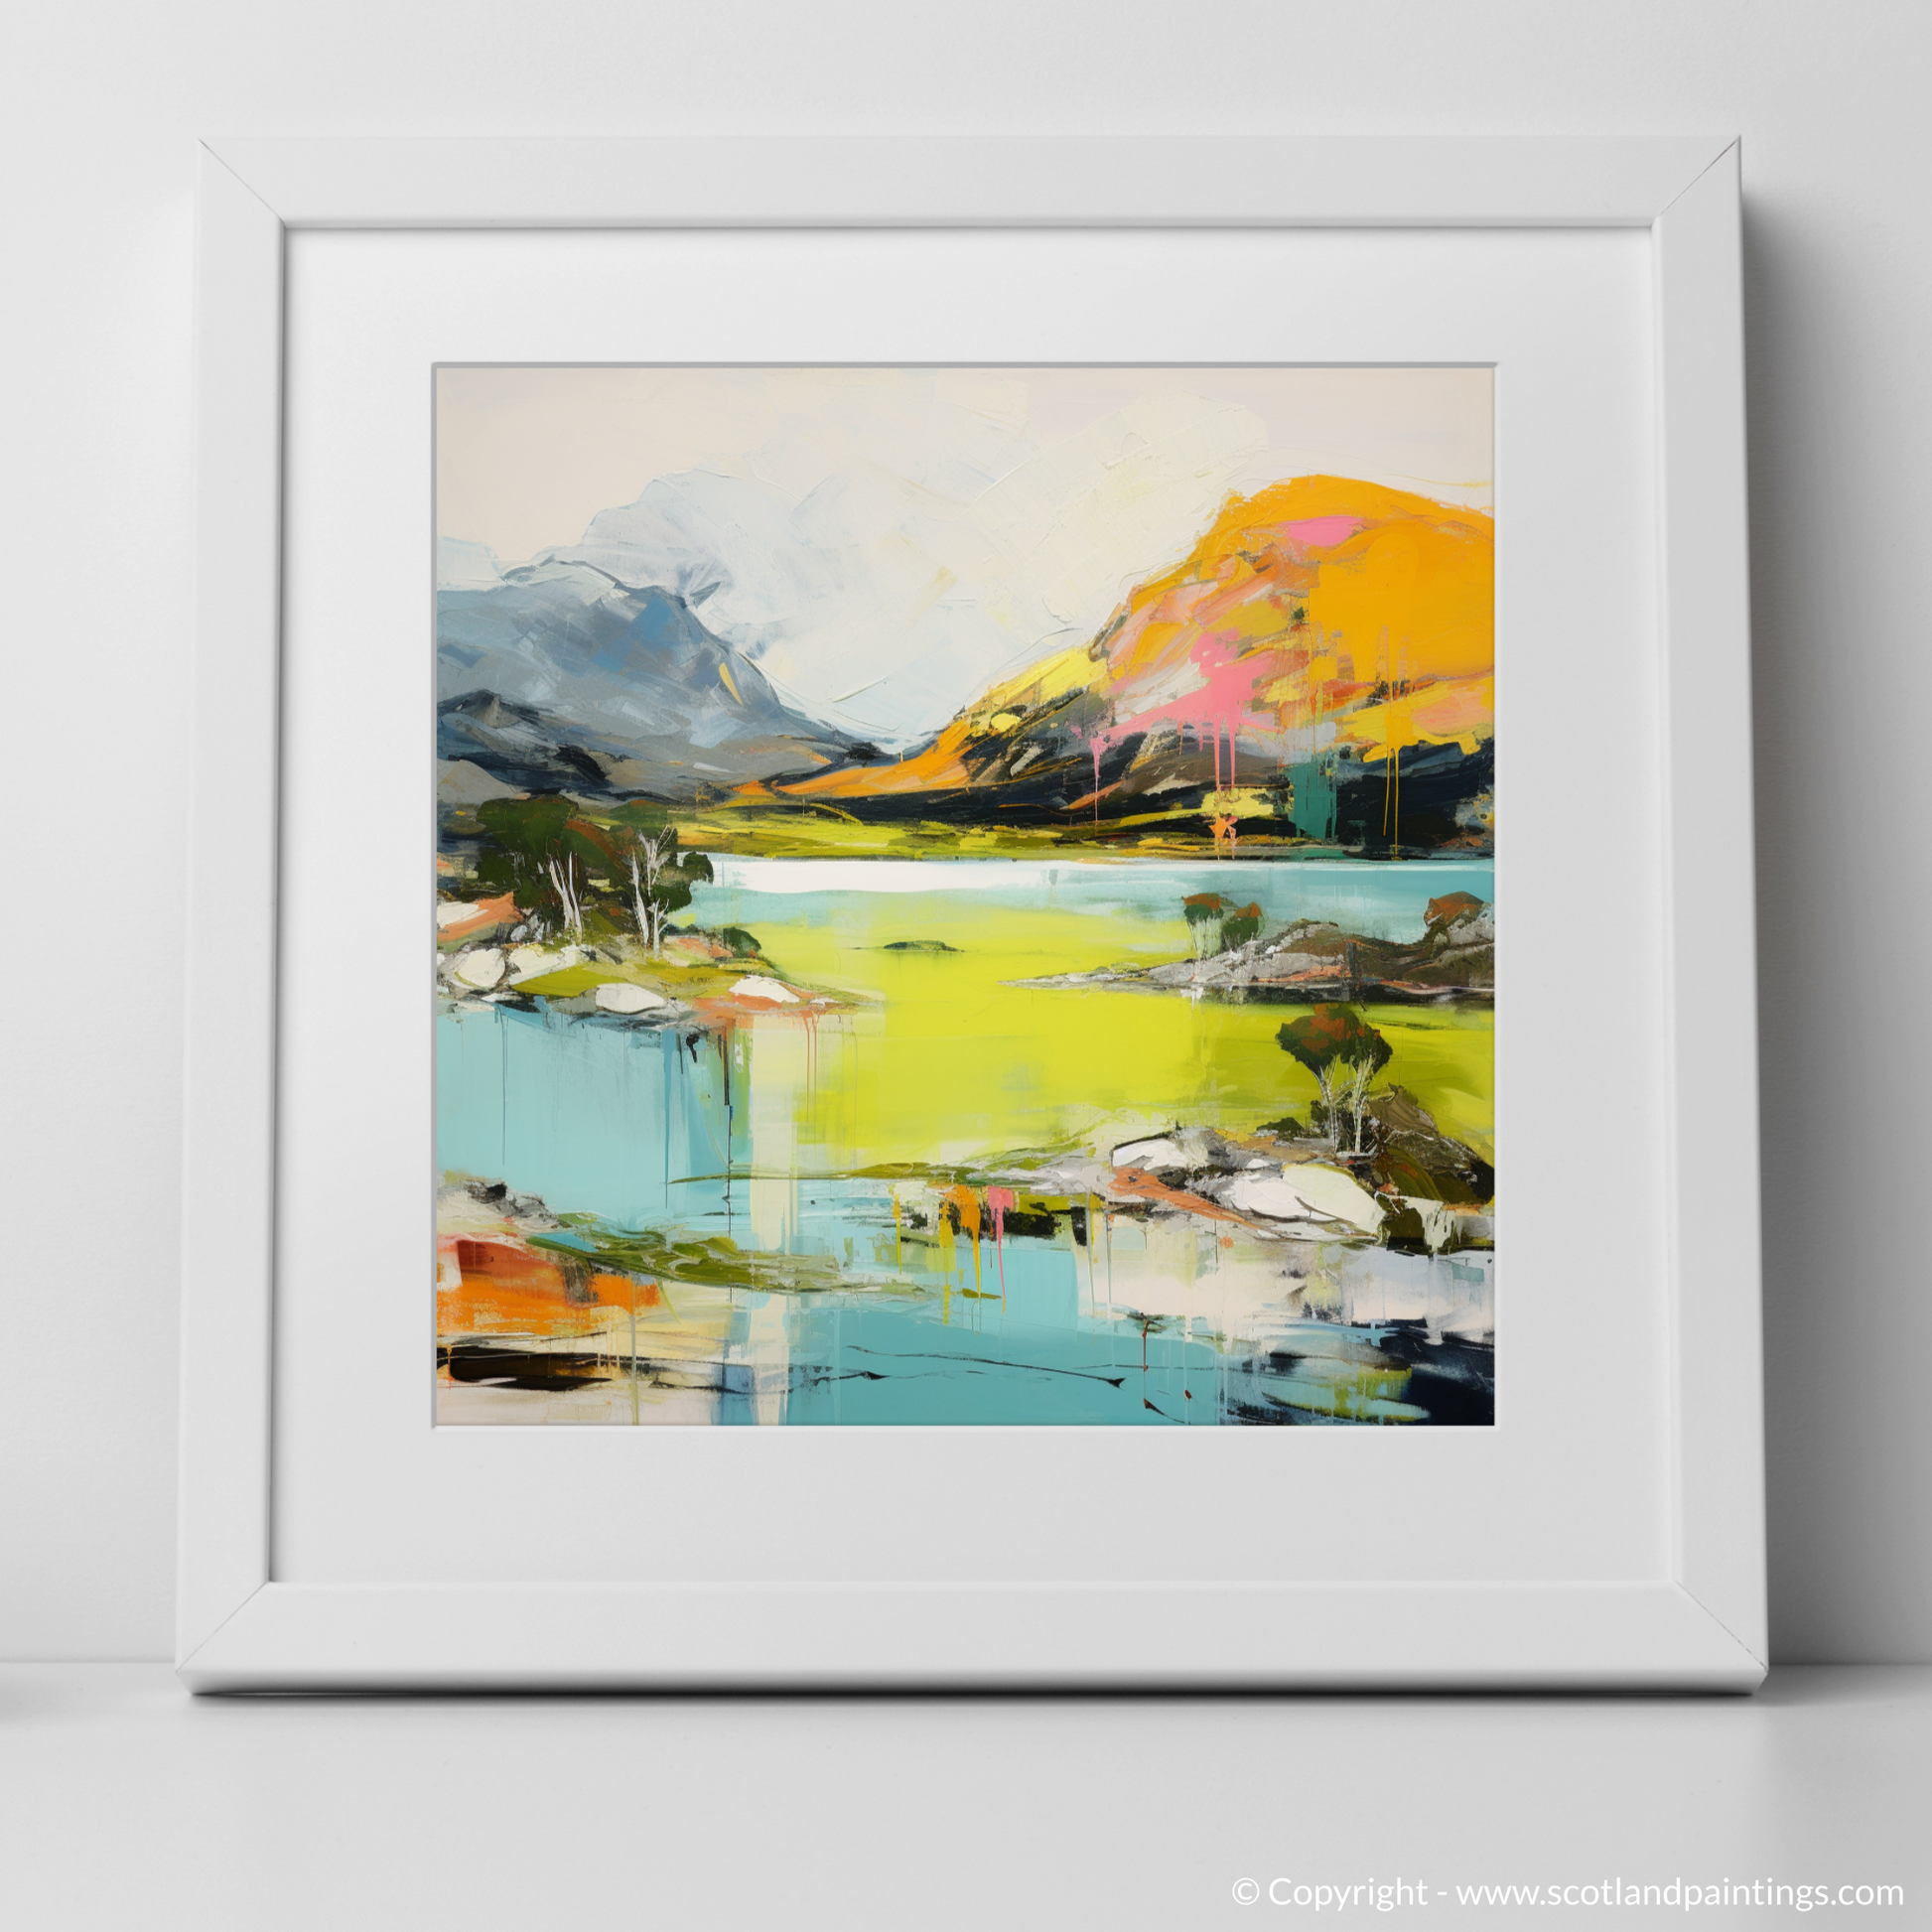 Art Print of Loch Maree, Wester Ross in summer with a white frame